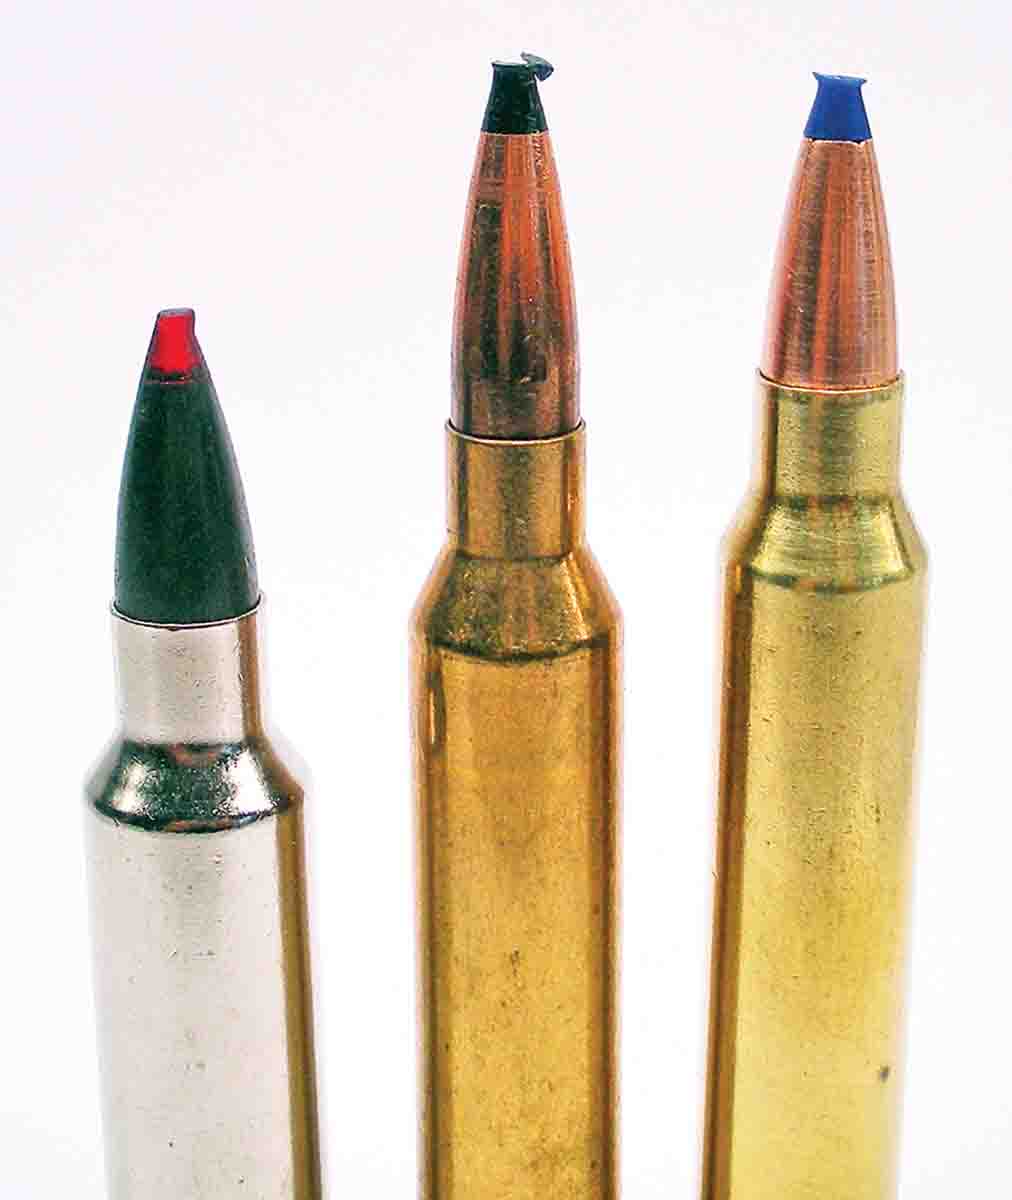 Recoil can cause plastic tips to be deformed while riding out the force of recoil in the magazine box.